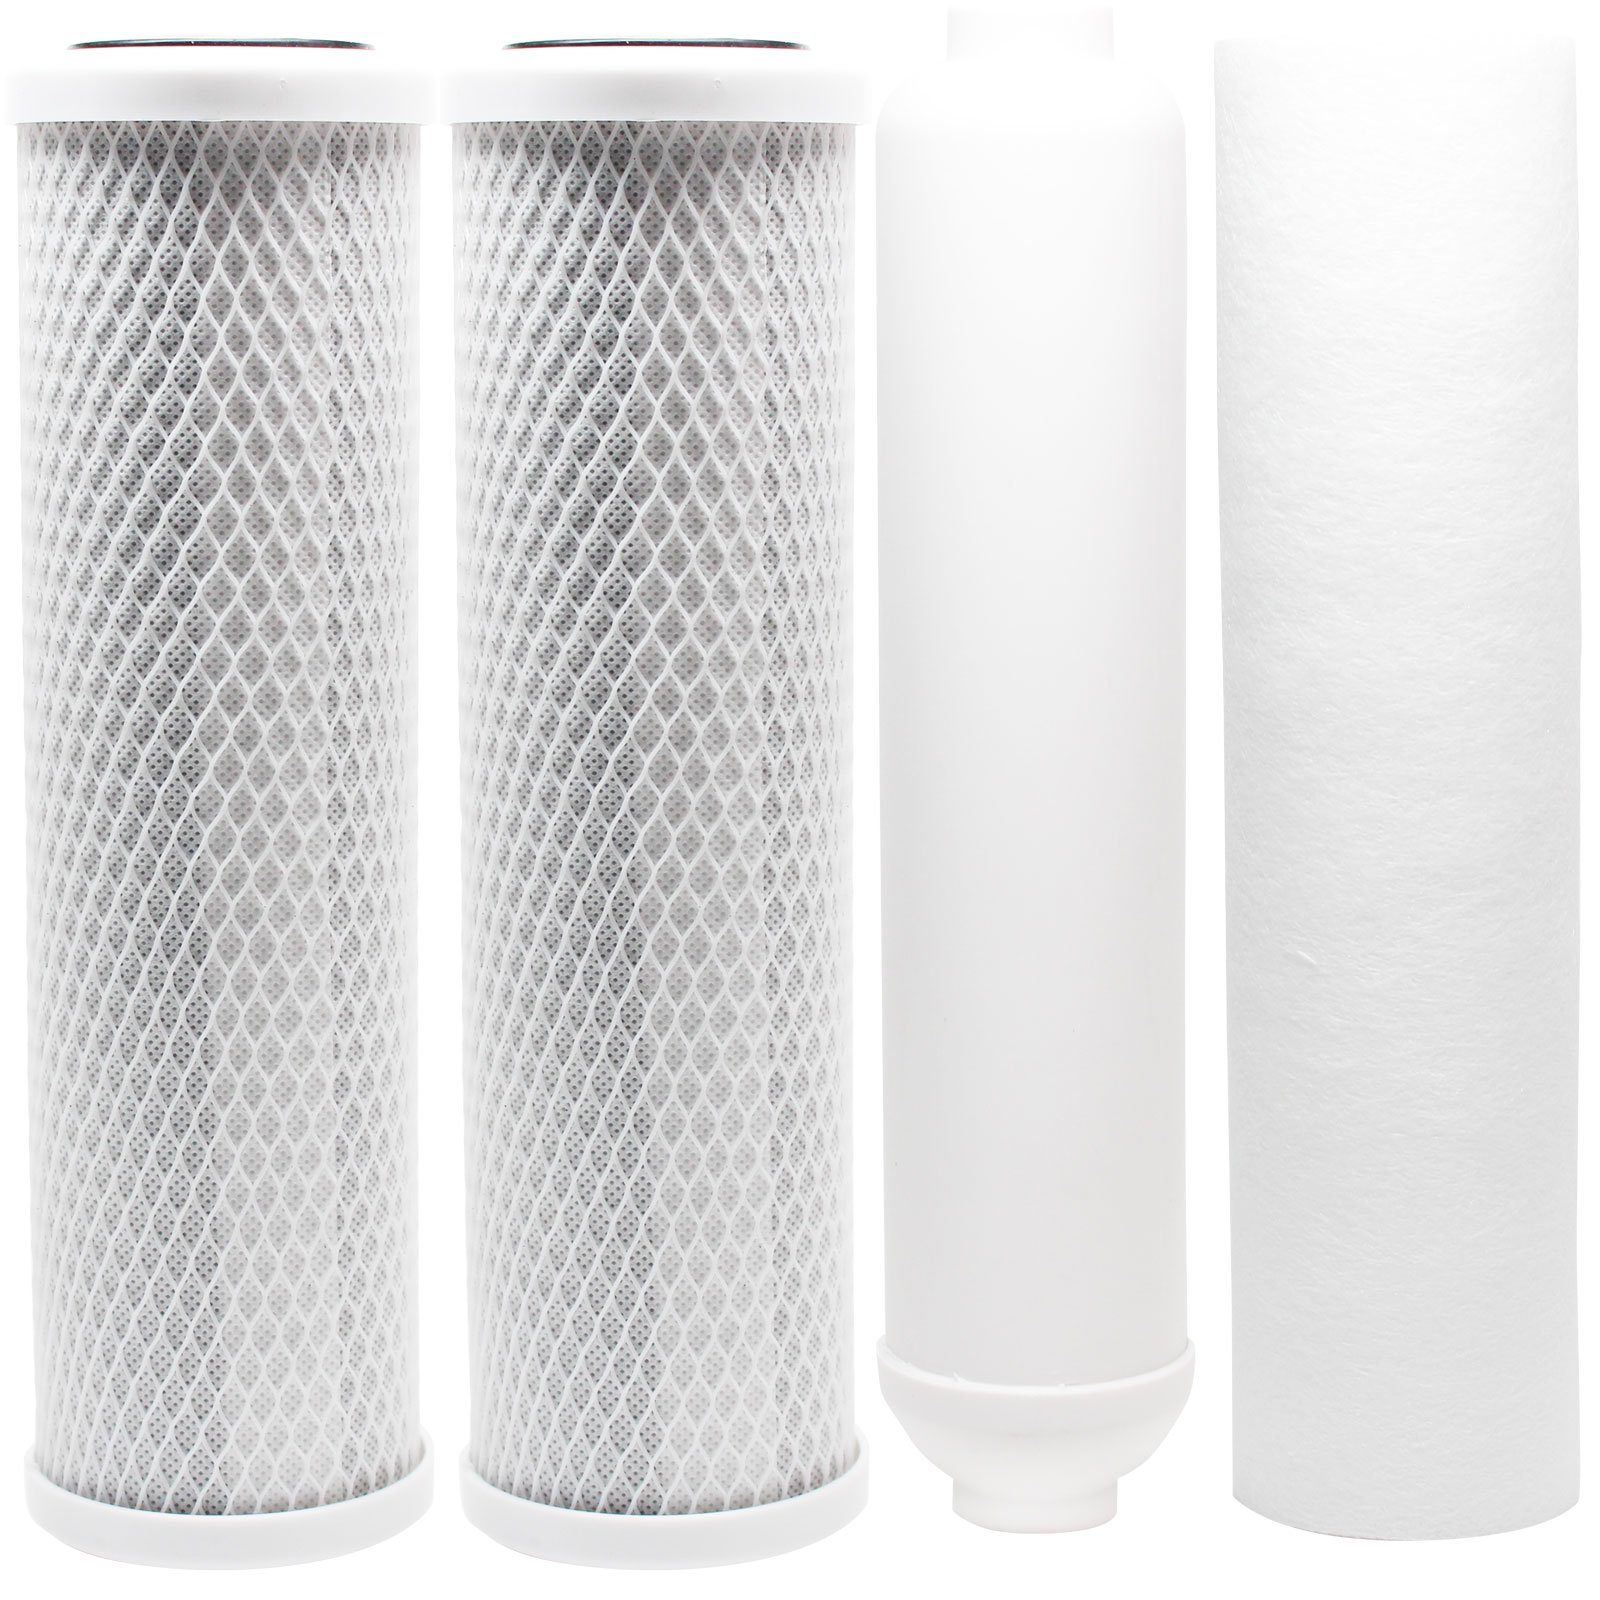 Replacement Filter Kit Compatible with Watts W-525 RO System - Includes Carbon Block Filters, PP Sediment Filter & Inline Filter Cartridge - Denali Pure Brand